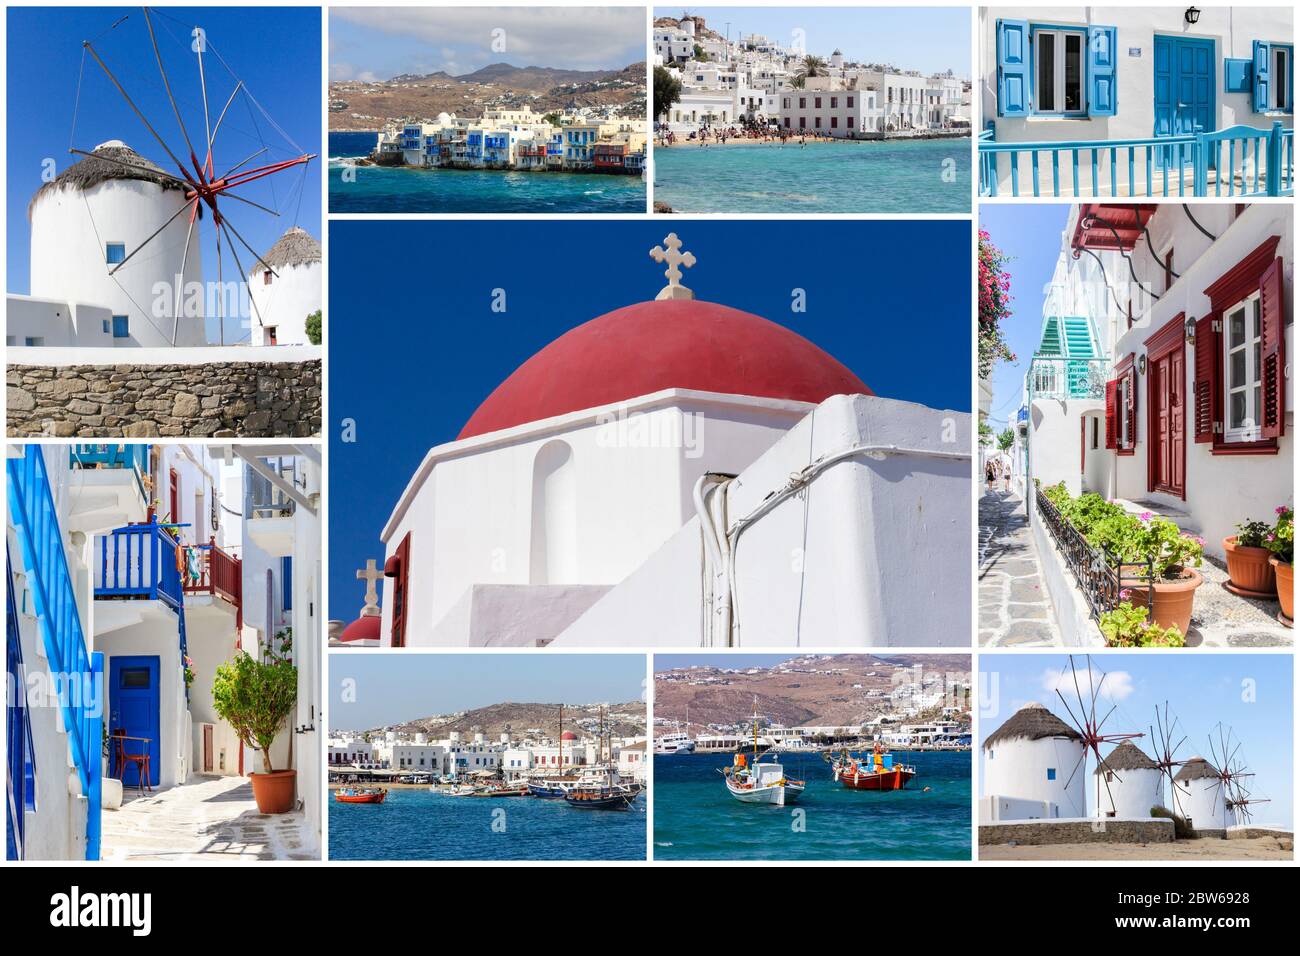 Travel images collage of Mykonos, Greece Stock Photo